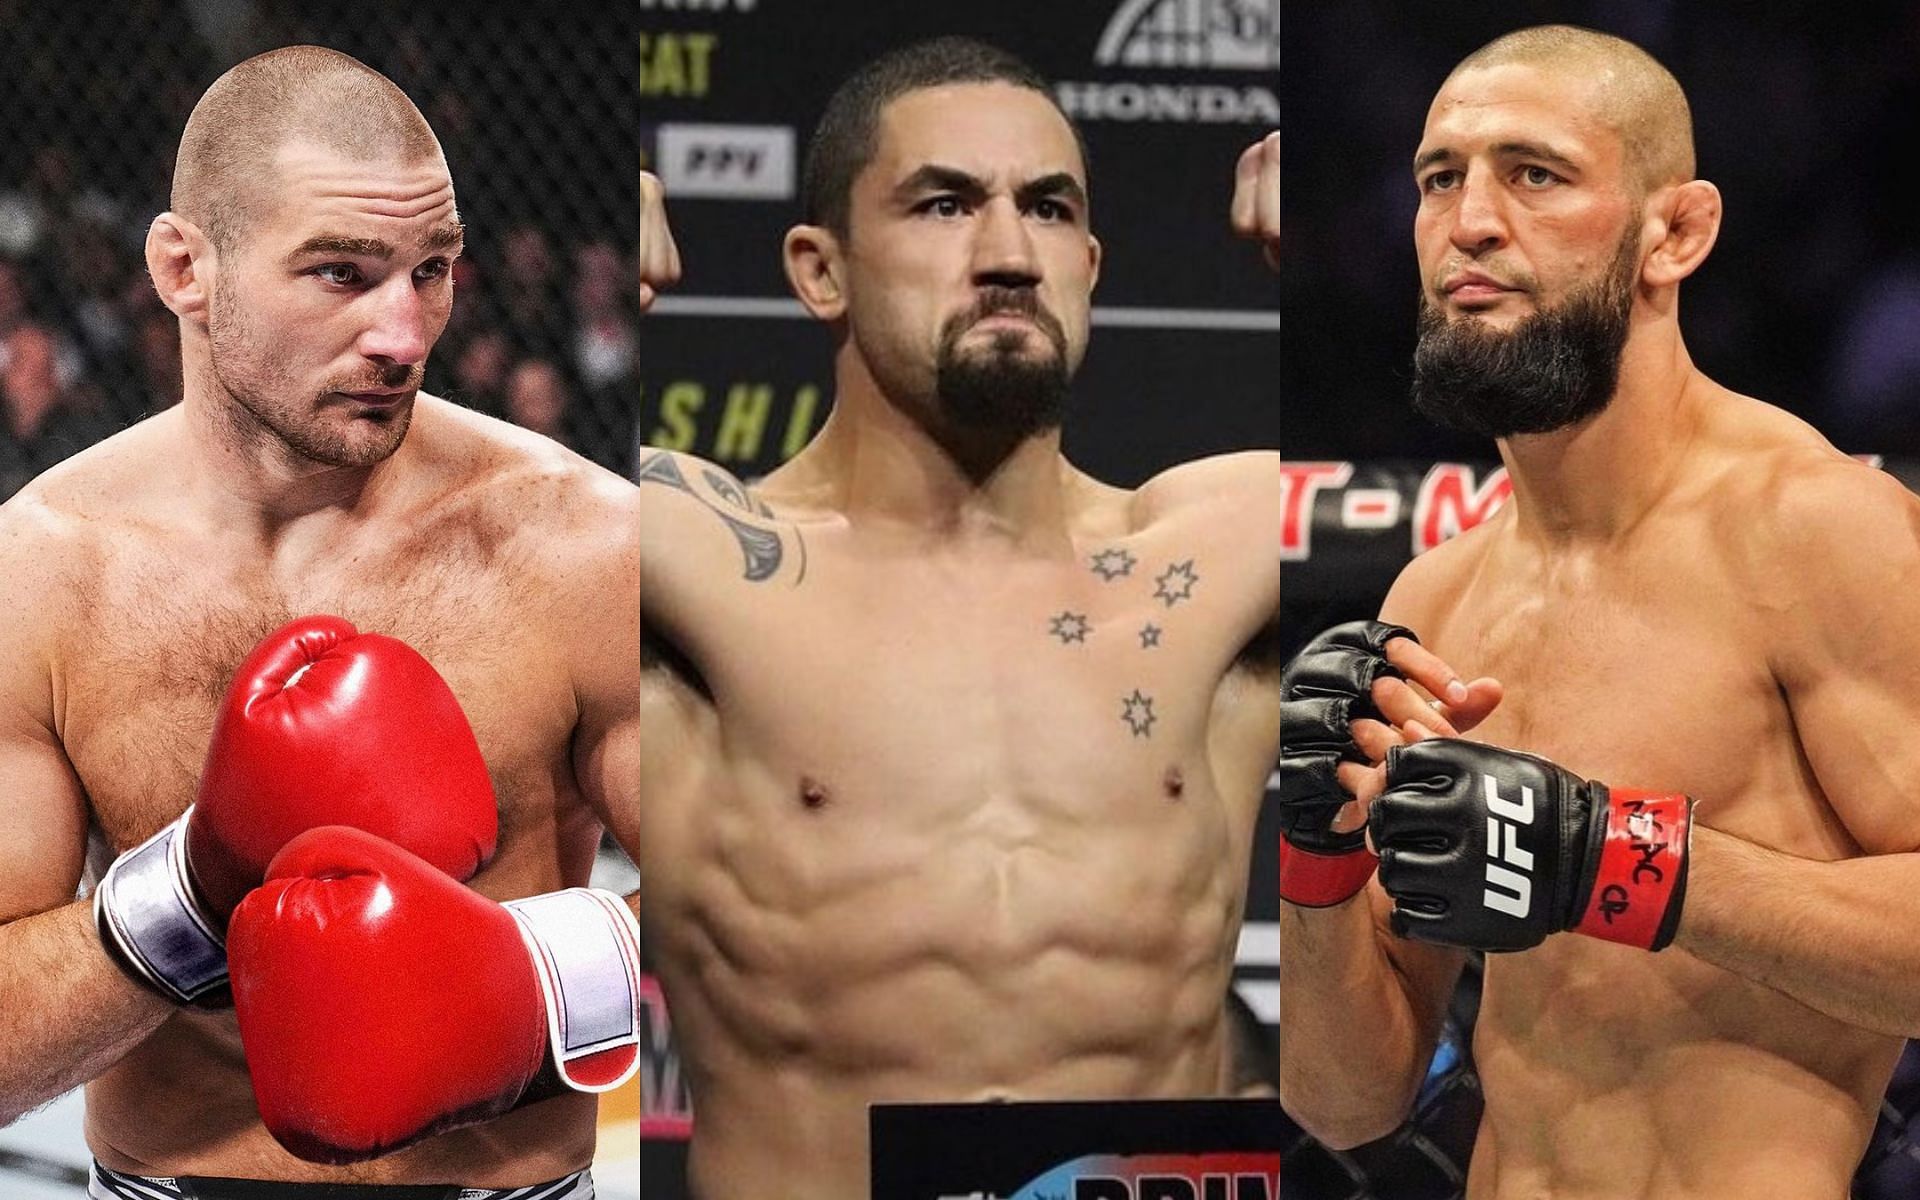 Sean Strickland (left) loses No.1 contender spot to Robert Whittaker (middle) vs. Khamzat Chimaev (right)